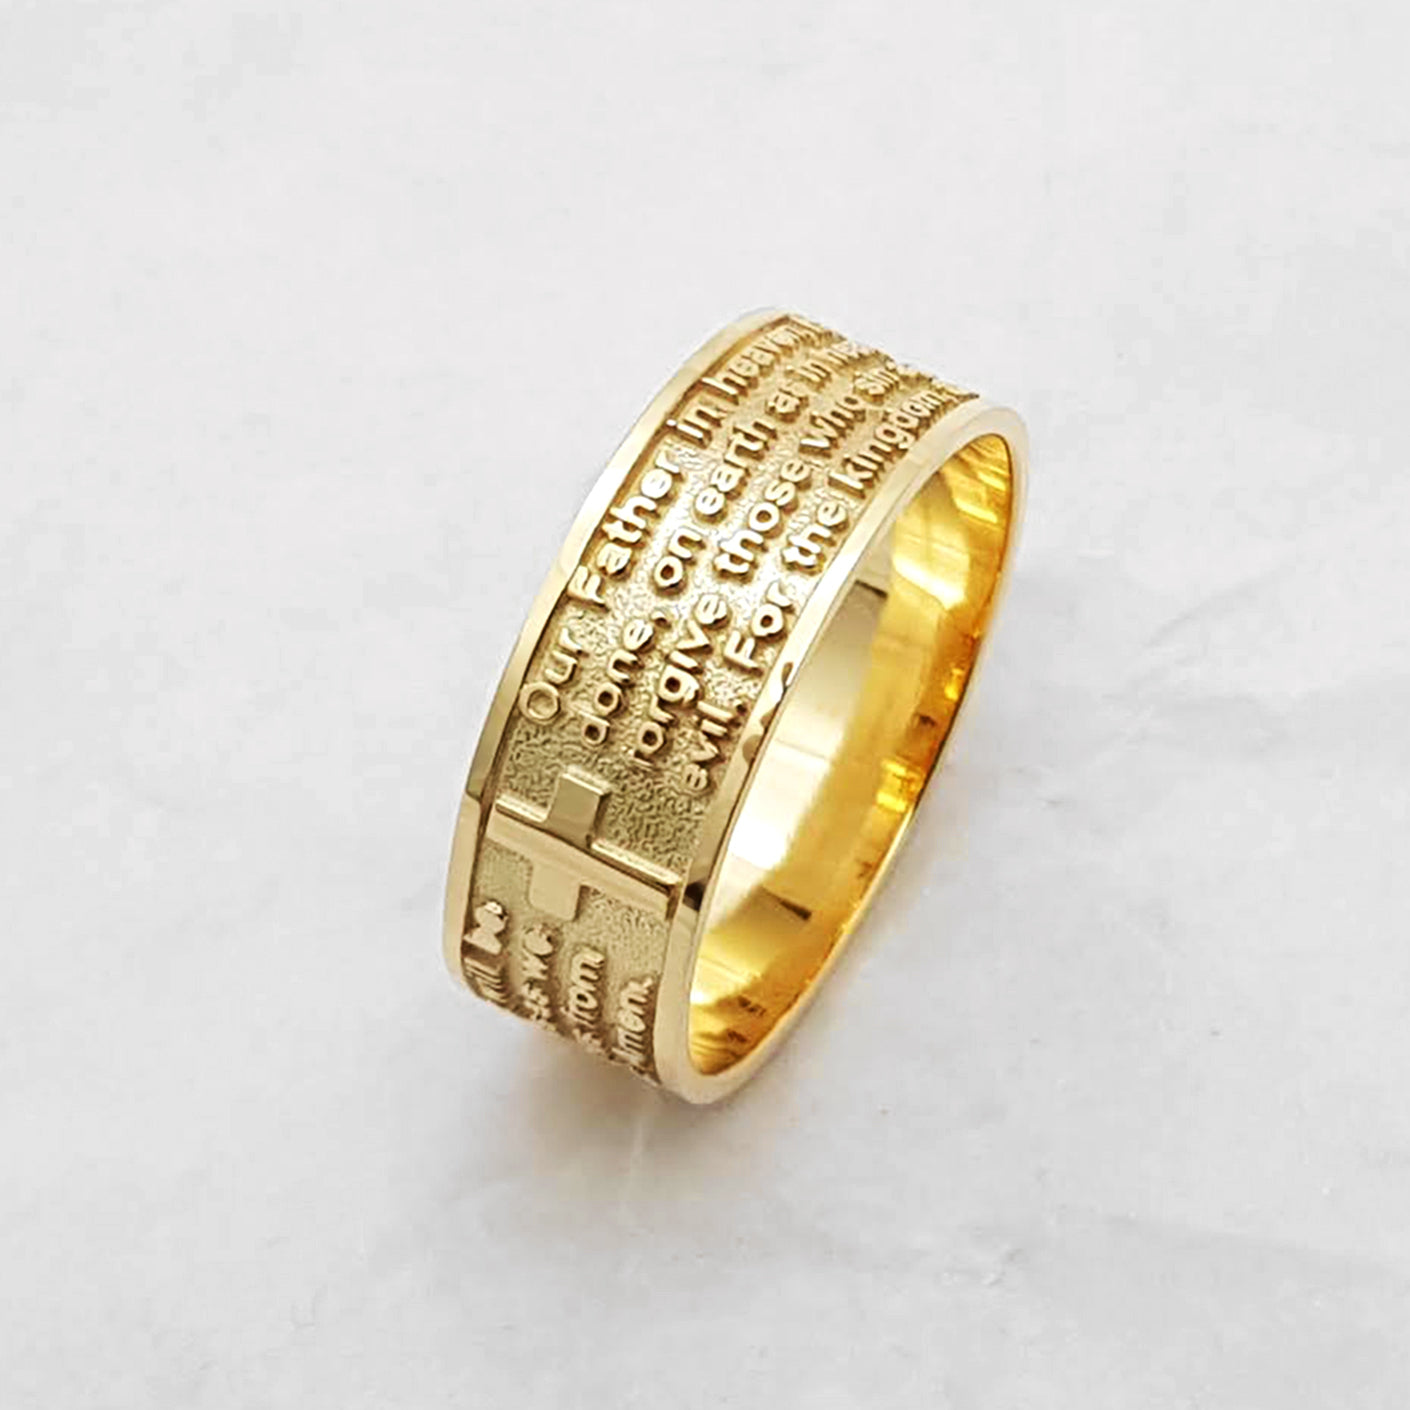  GOWE The Lord of Rings Ring for Men Women The Precious Ring of  Mordor Pure 18K Solid Yellow Gold: Clothing, Shoes & Jewelry